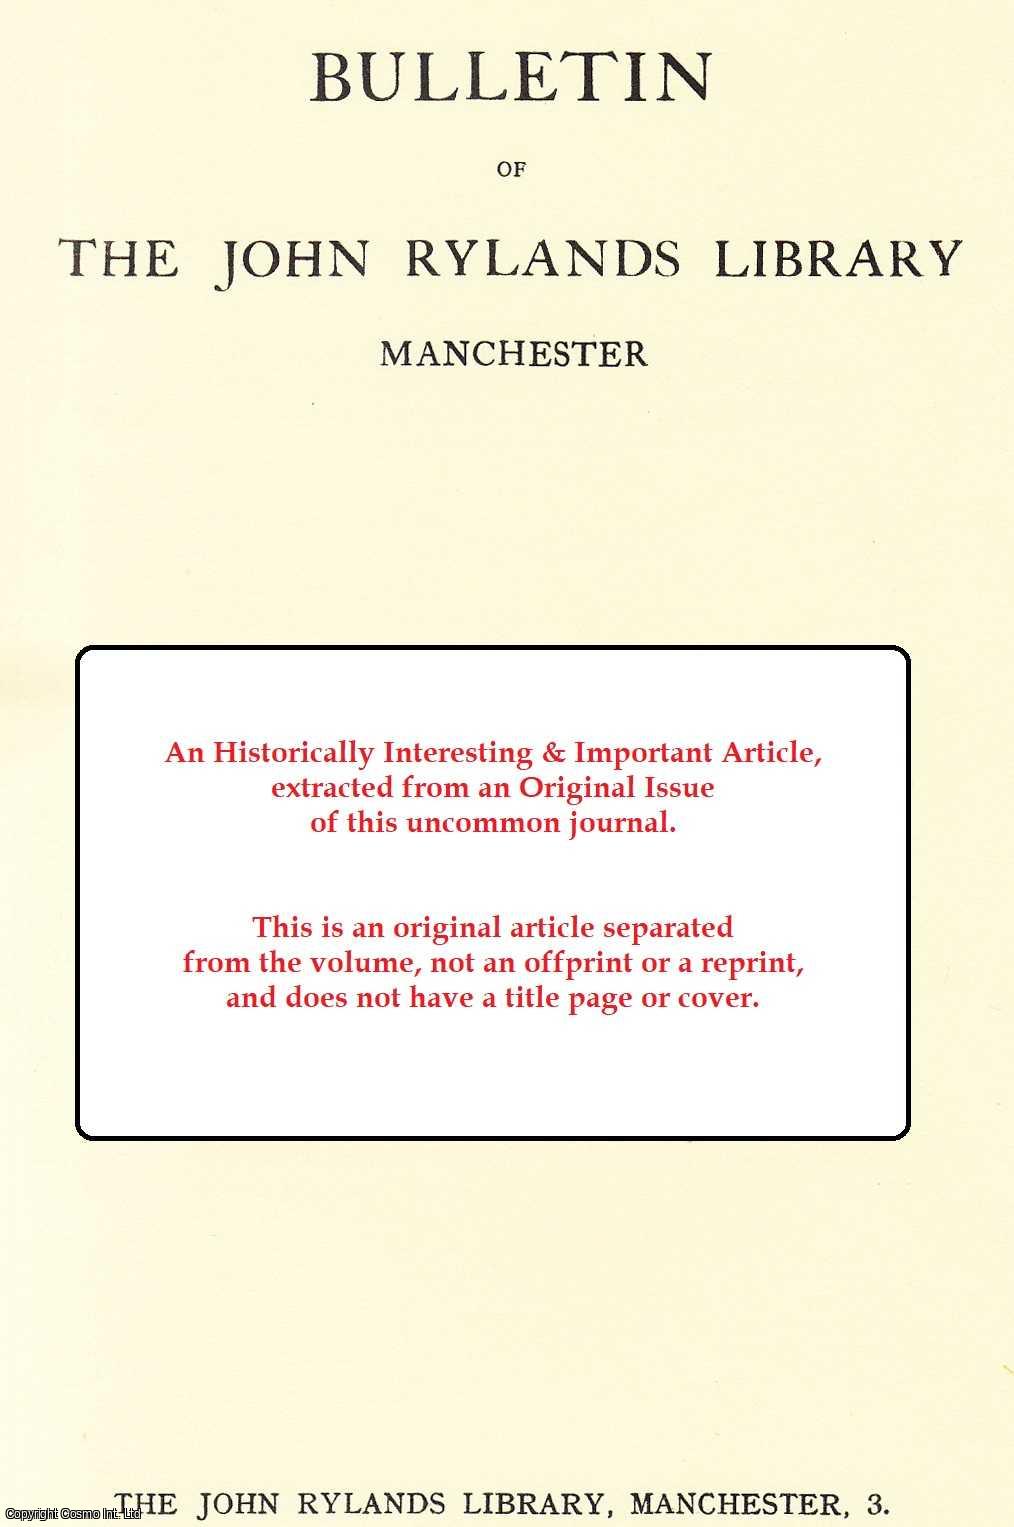 H.J. Perkin - What is Social History? An original article from the Bulletin of the John Rylands Library Manchester, 1953.